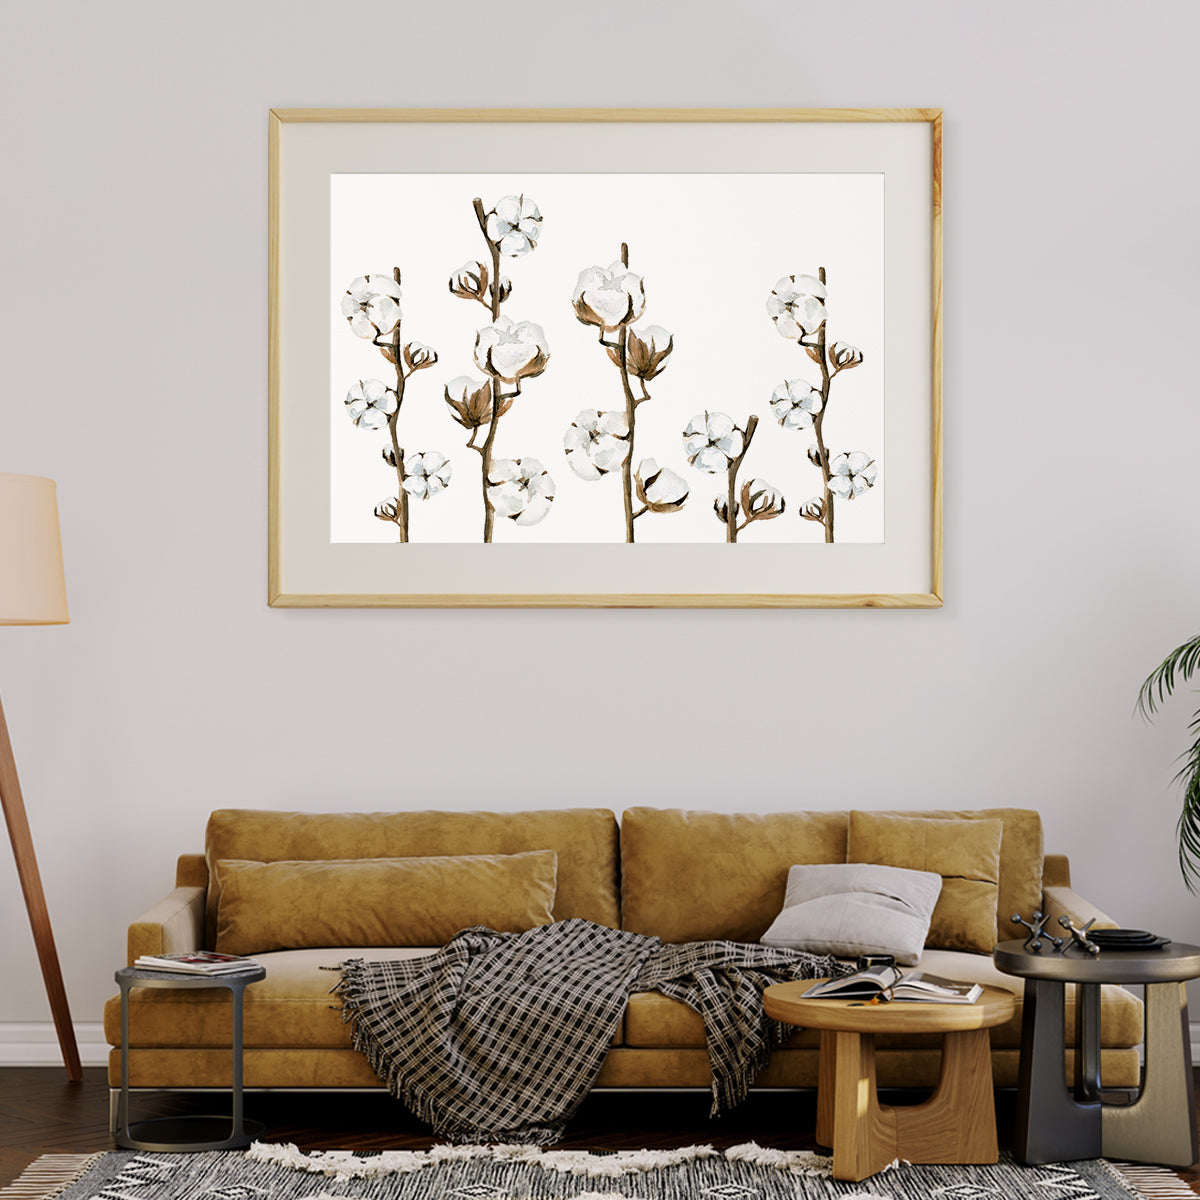 Cotton Branches Posters For Home Decor-Horizontal Posters NOT FRAMED-CetArt-10″x8″ inches-CetArt